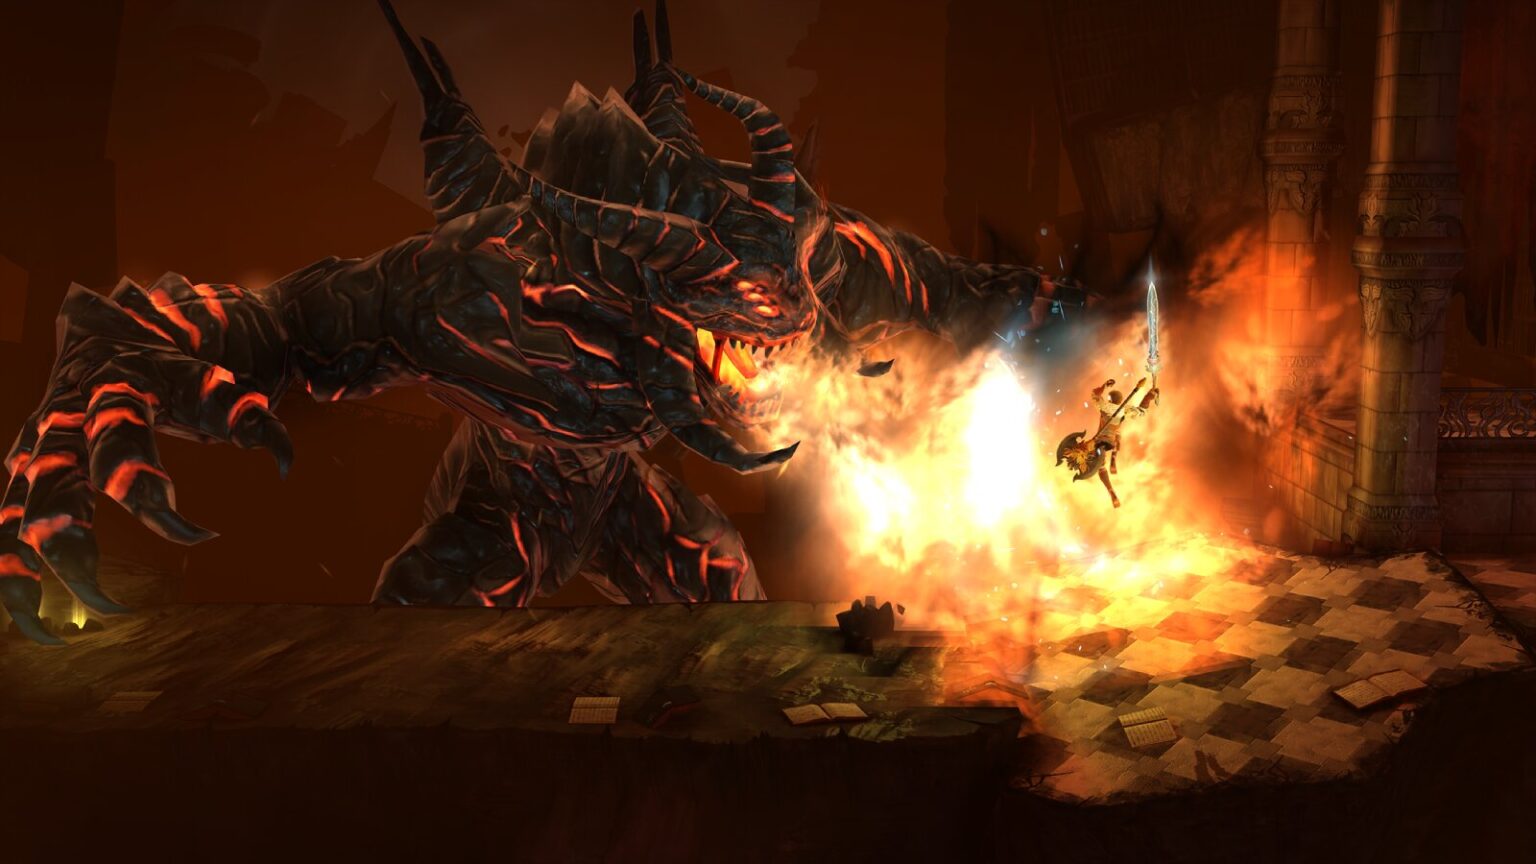 A warrior fights a fiery beast in a hack and slash mobile game